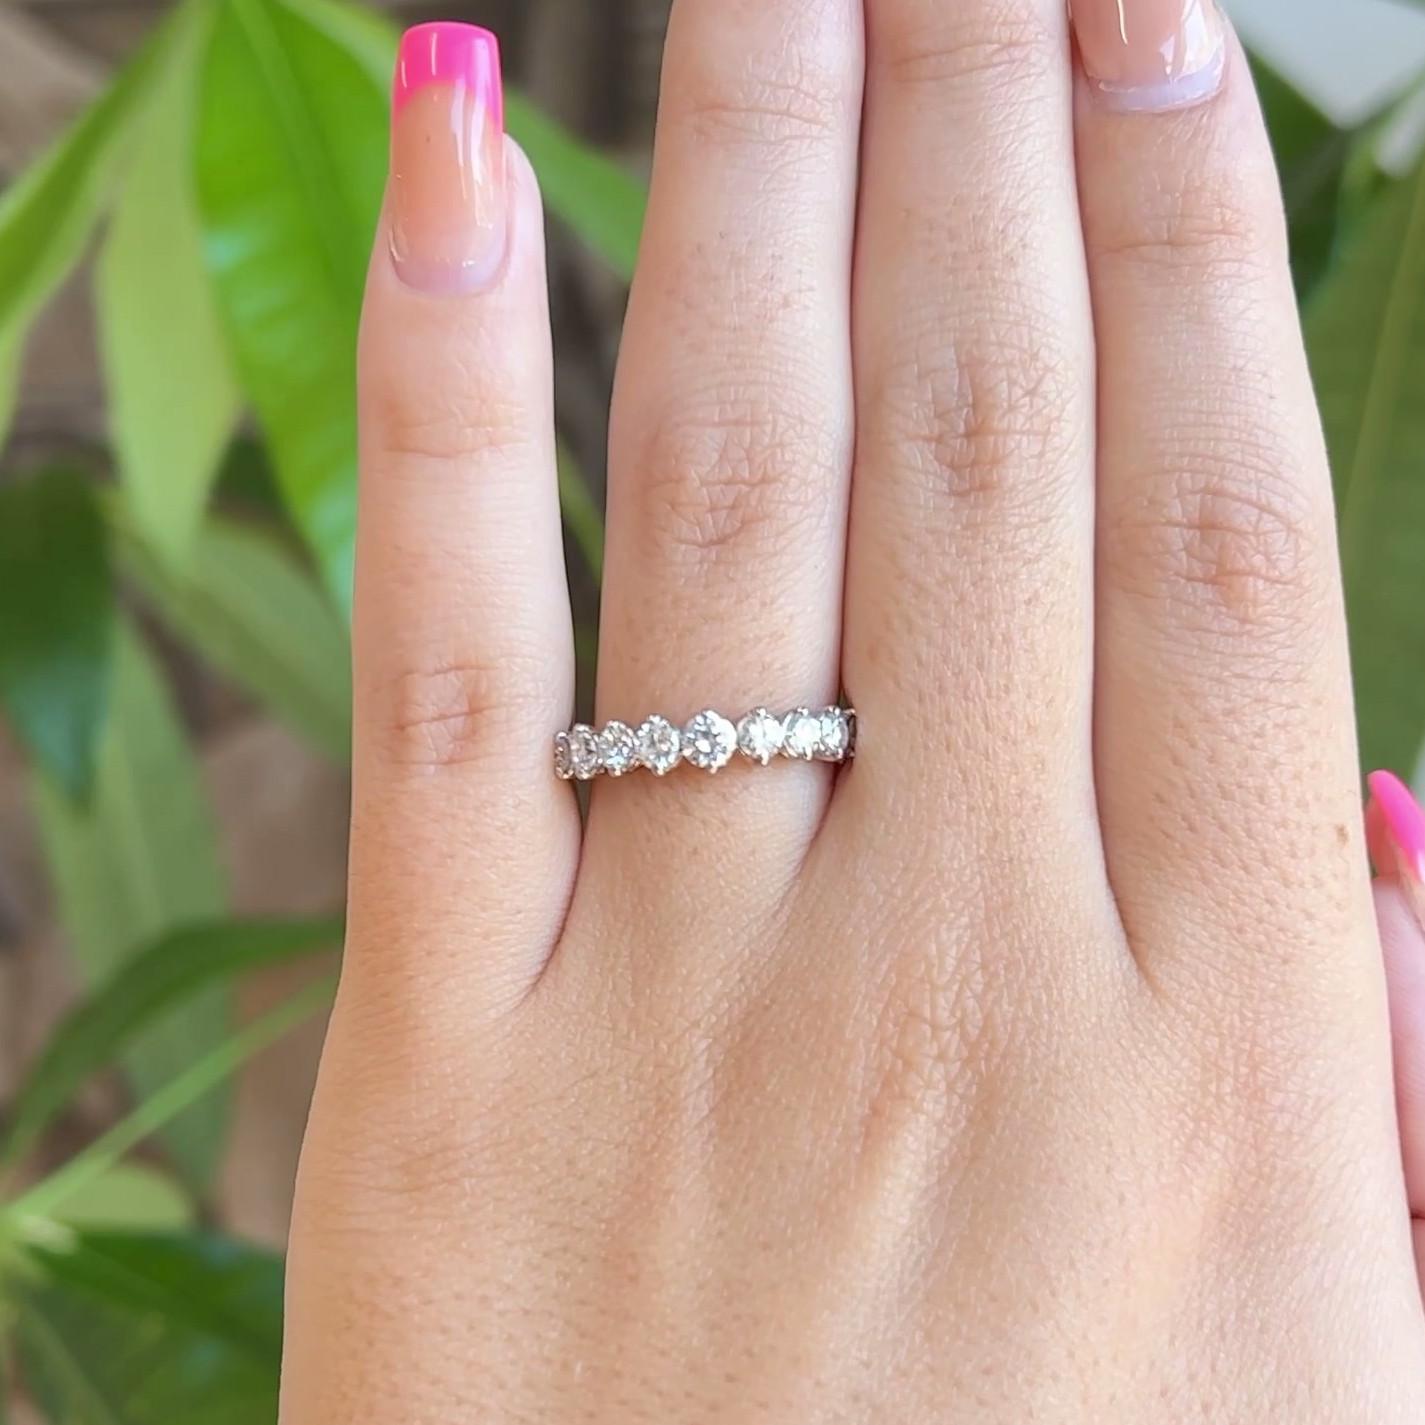 One Vintage Diamond Platinum Half Eternity Band. Featuring nine round brilliant cut diamonds with a total weight of approximately 0.85 carat, graded F color, VS clarity. Crafted in platinum. Circa 1990. The ring is a size 6 and may be resized.